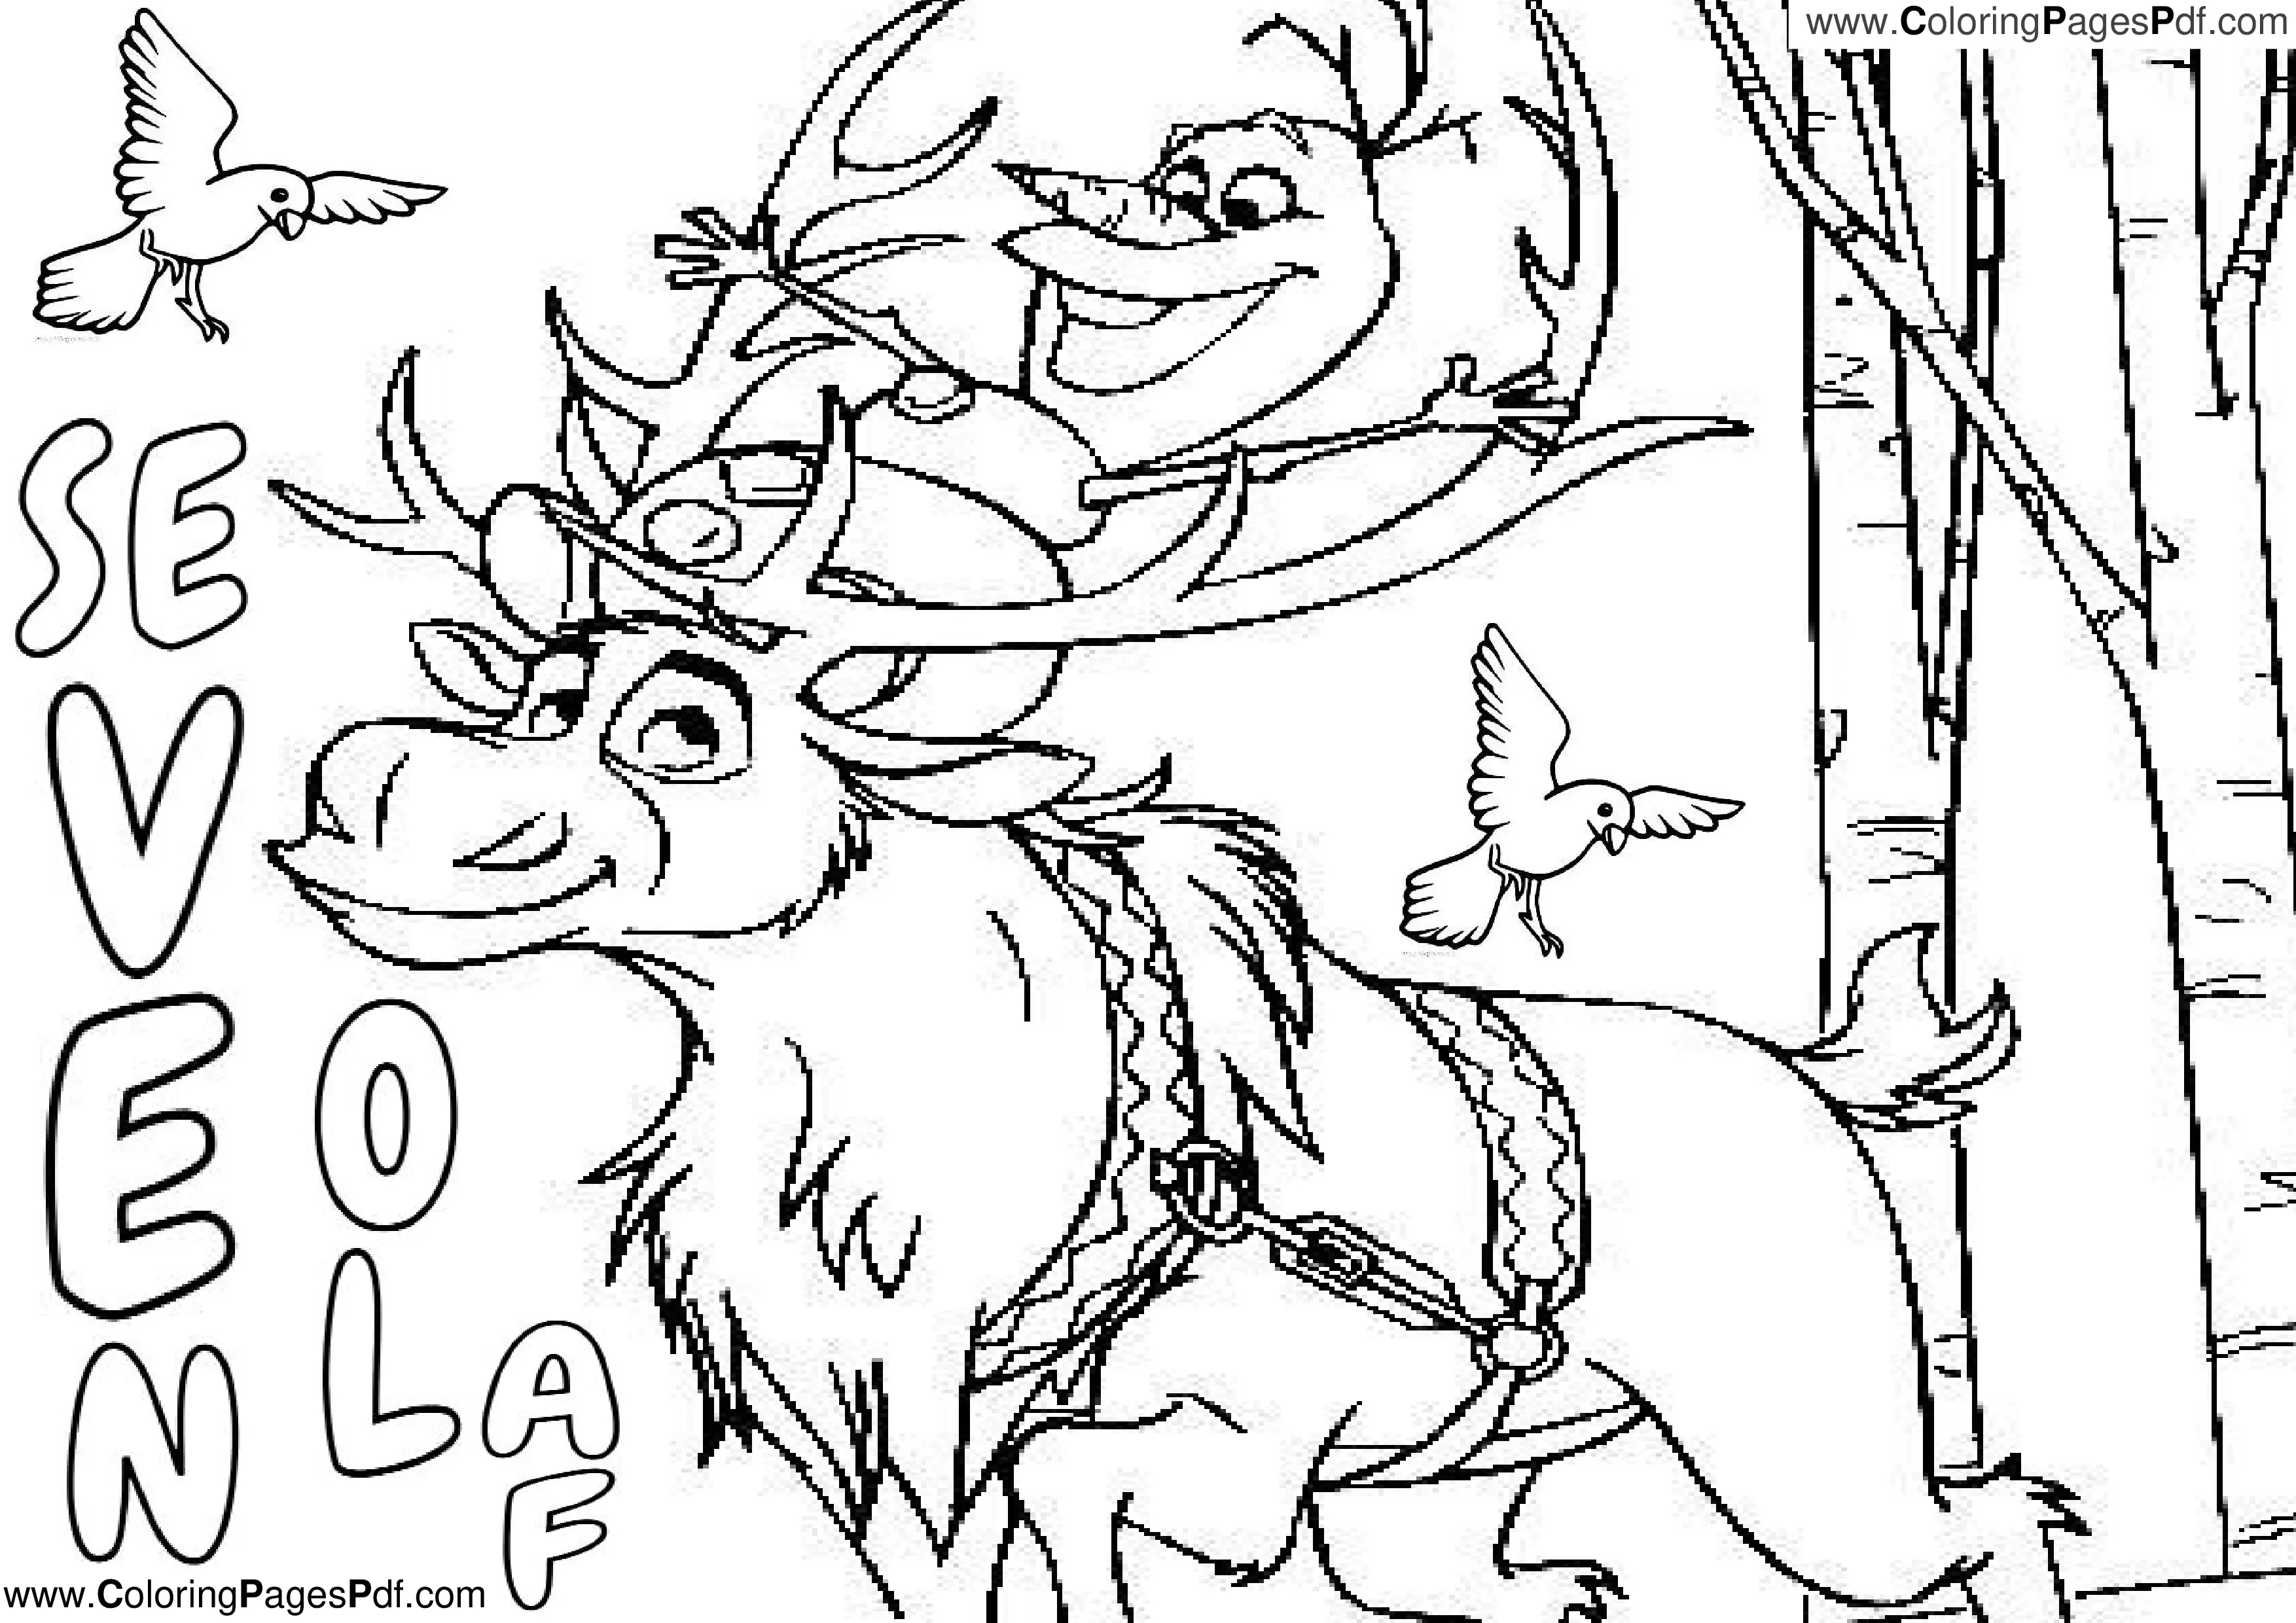 Sven & Olaf coloring pages